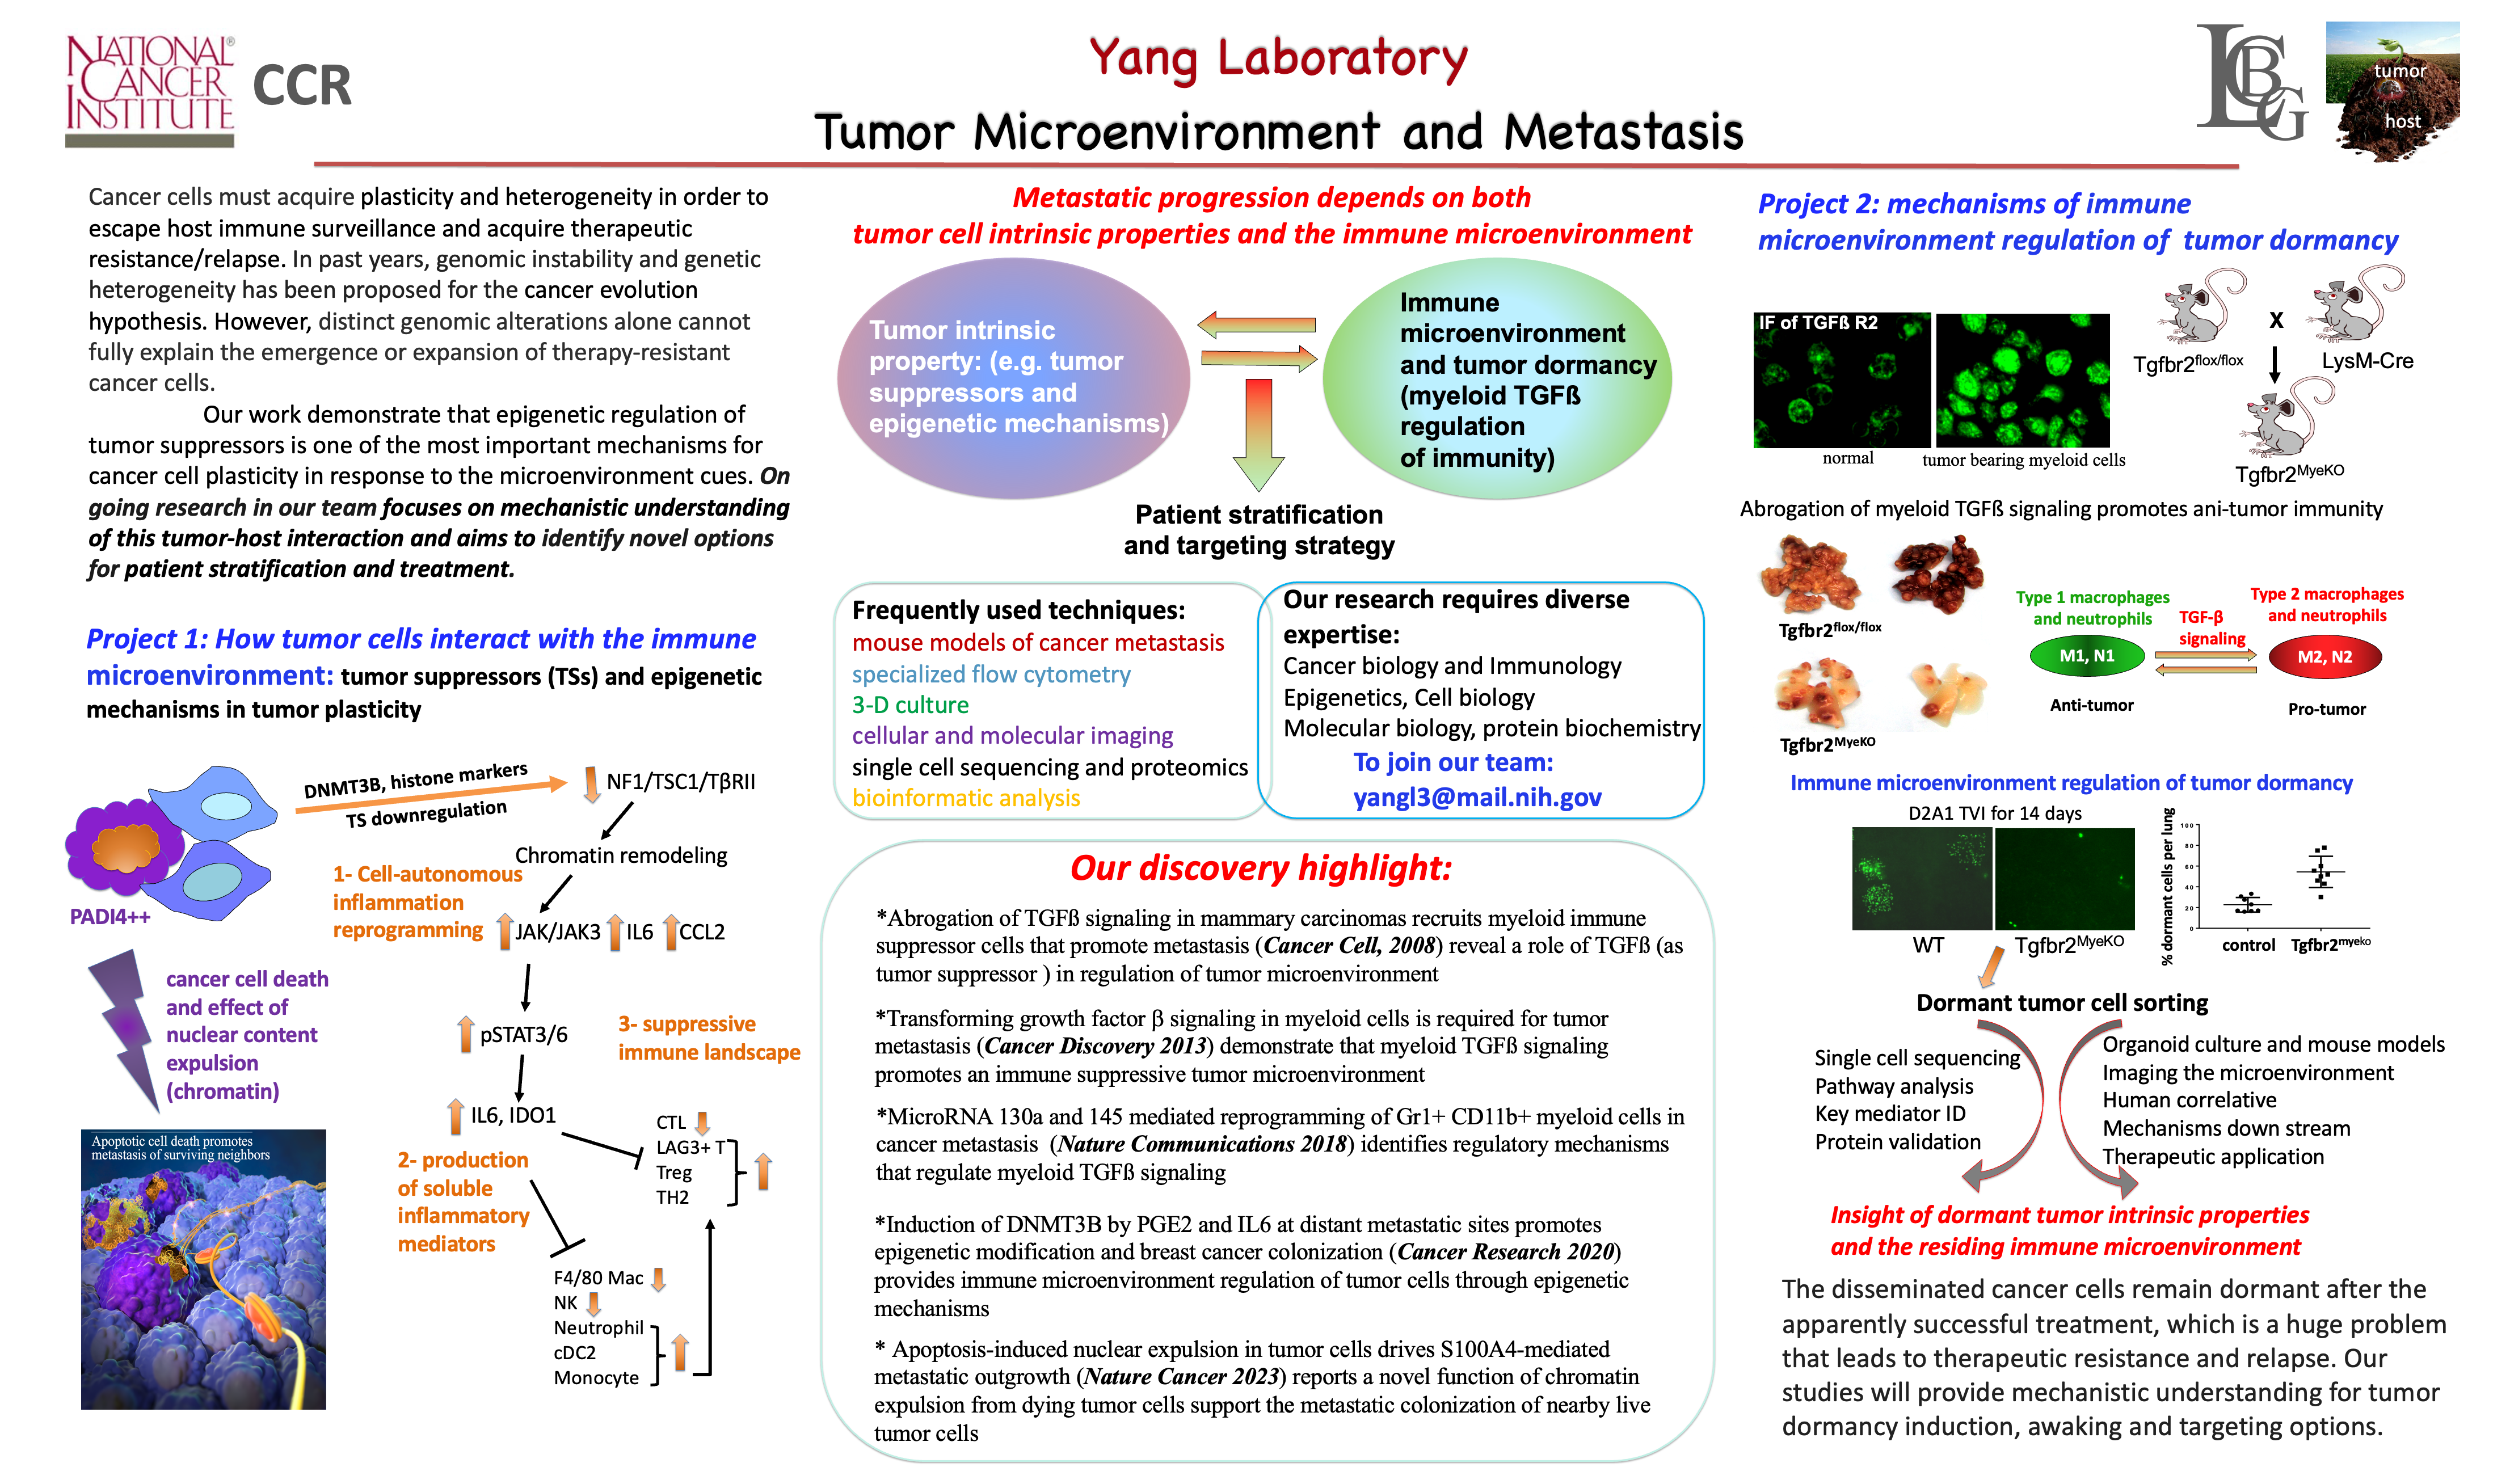 Poster summary of Yang Lab research projects